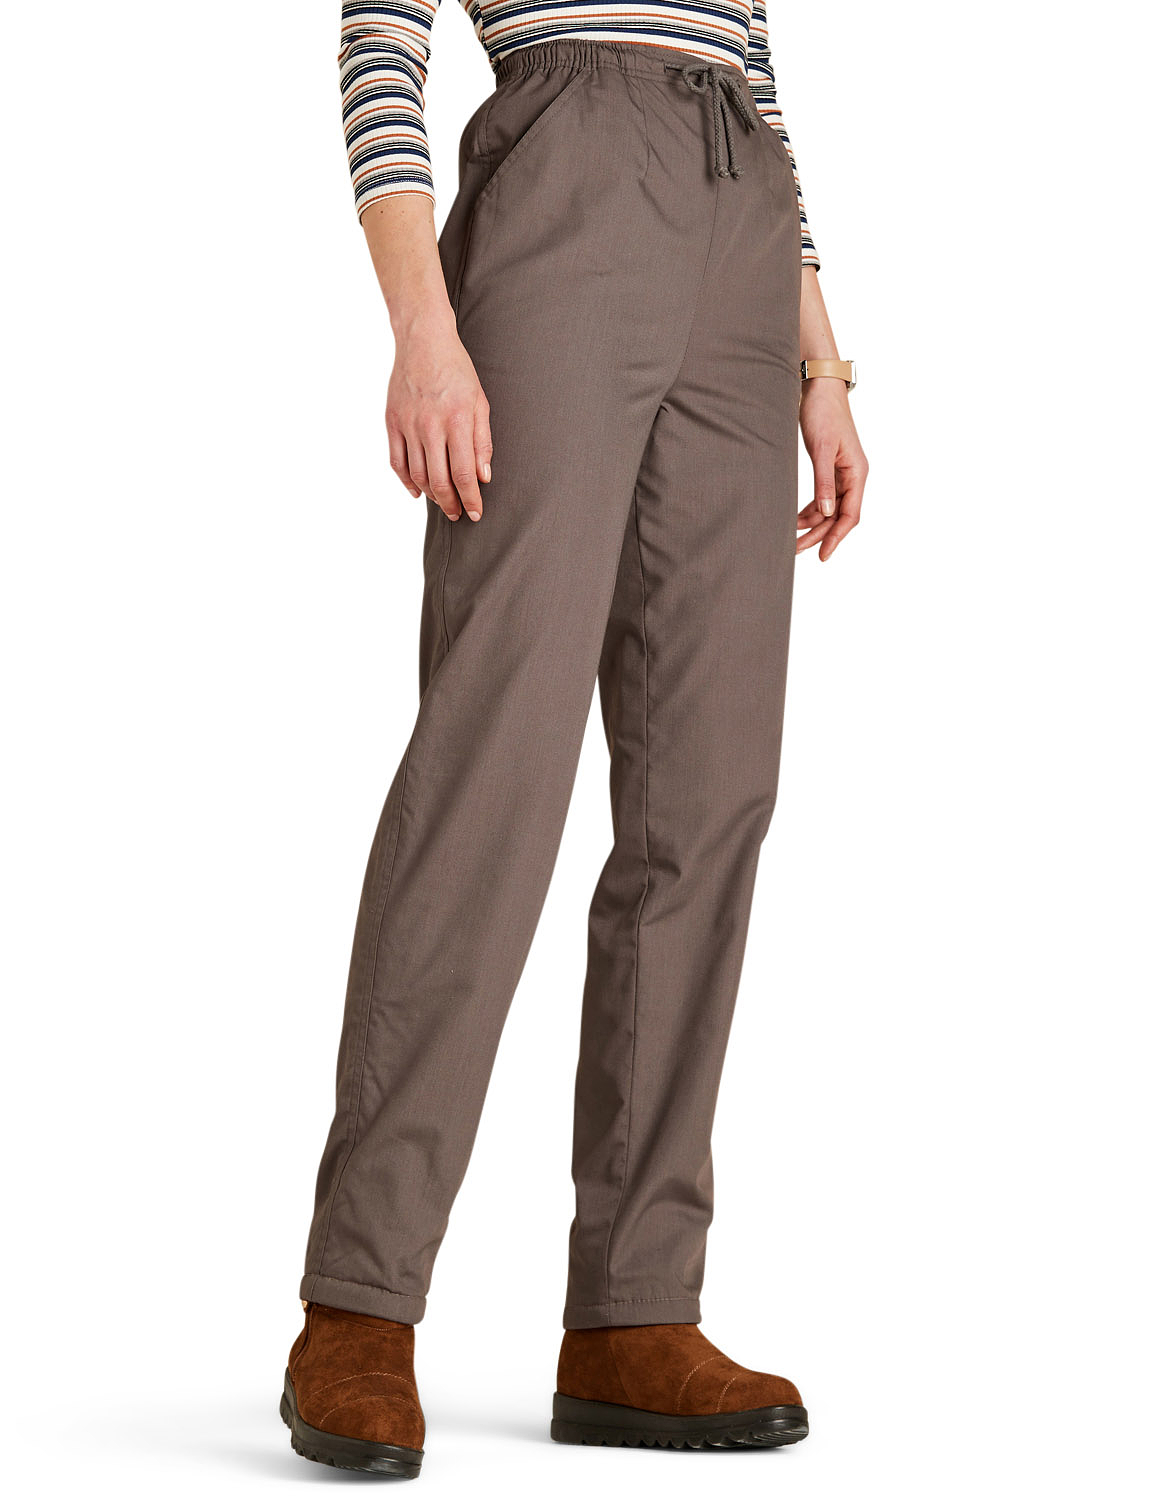 Buy Womens Ultra Warm Water Repellent Hiking Trousers Online  Decathlon